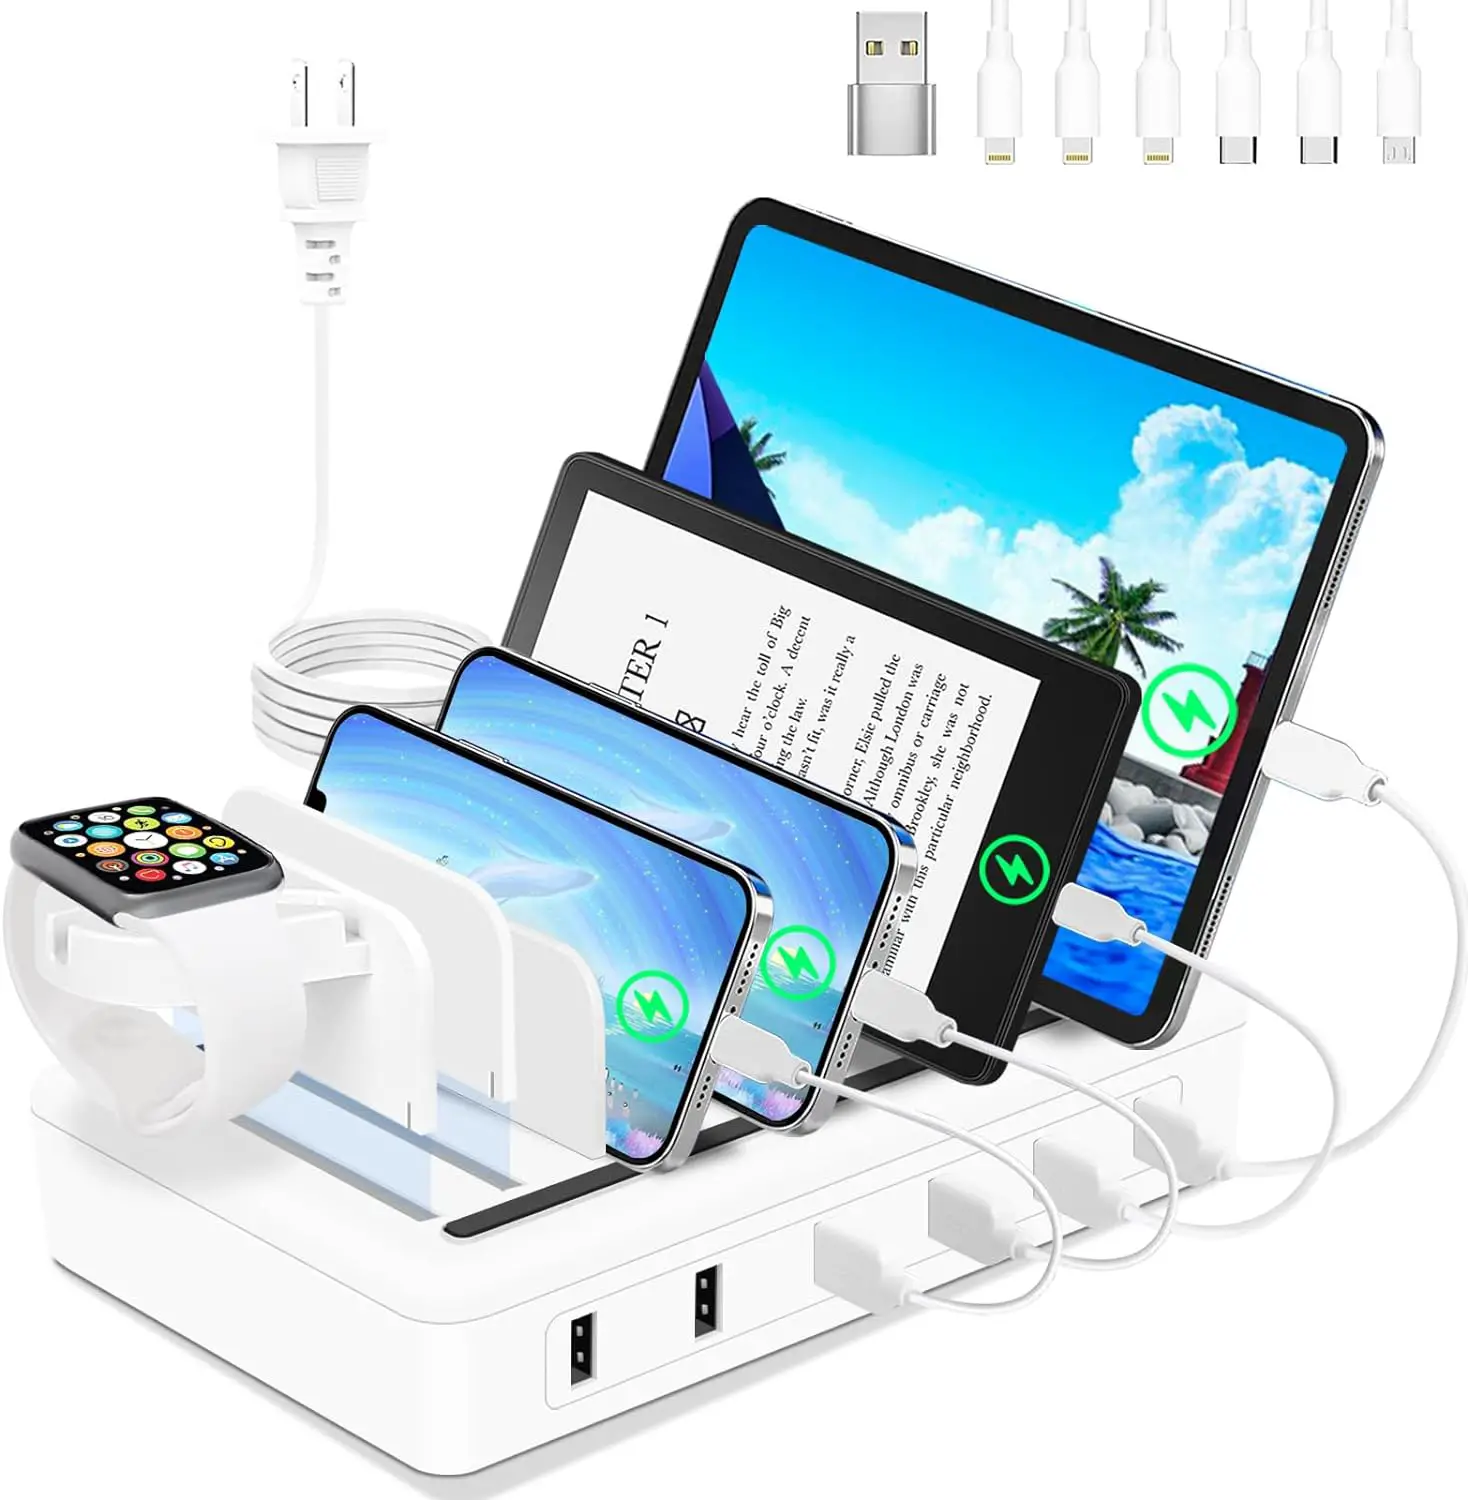 MERGROLY Fast Charging Station for Multiple Devices, 50W 6-Ports USB Charging Station with10-Slot, Sturdy Dividers, Watch Holder, Compatible with Phone/iPad/Kindle/Tablet (6 Short Cables Included)